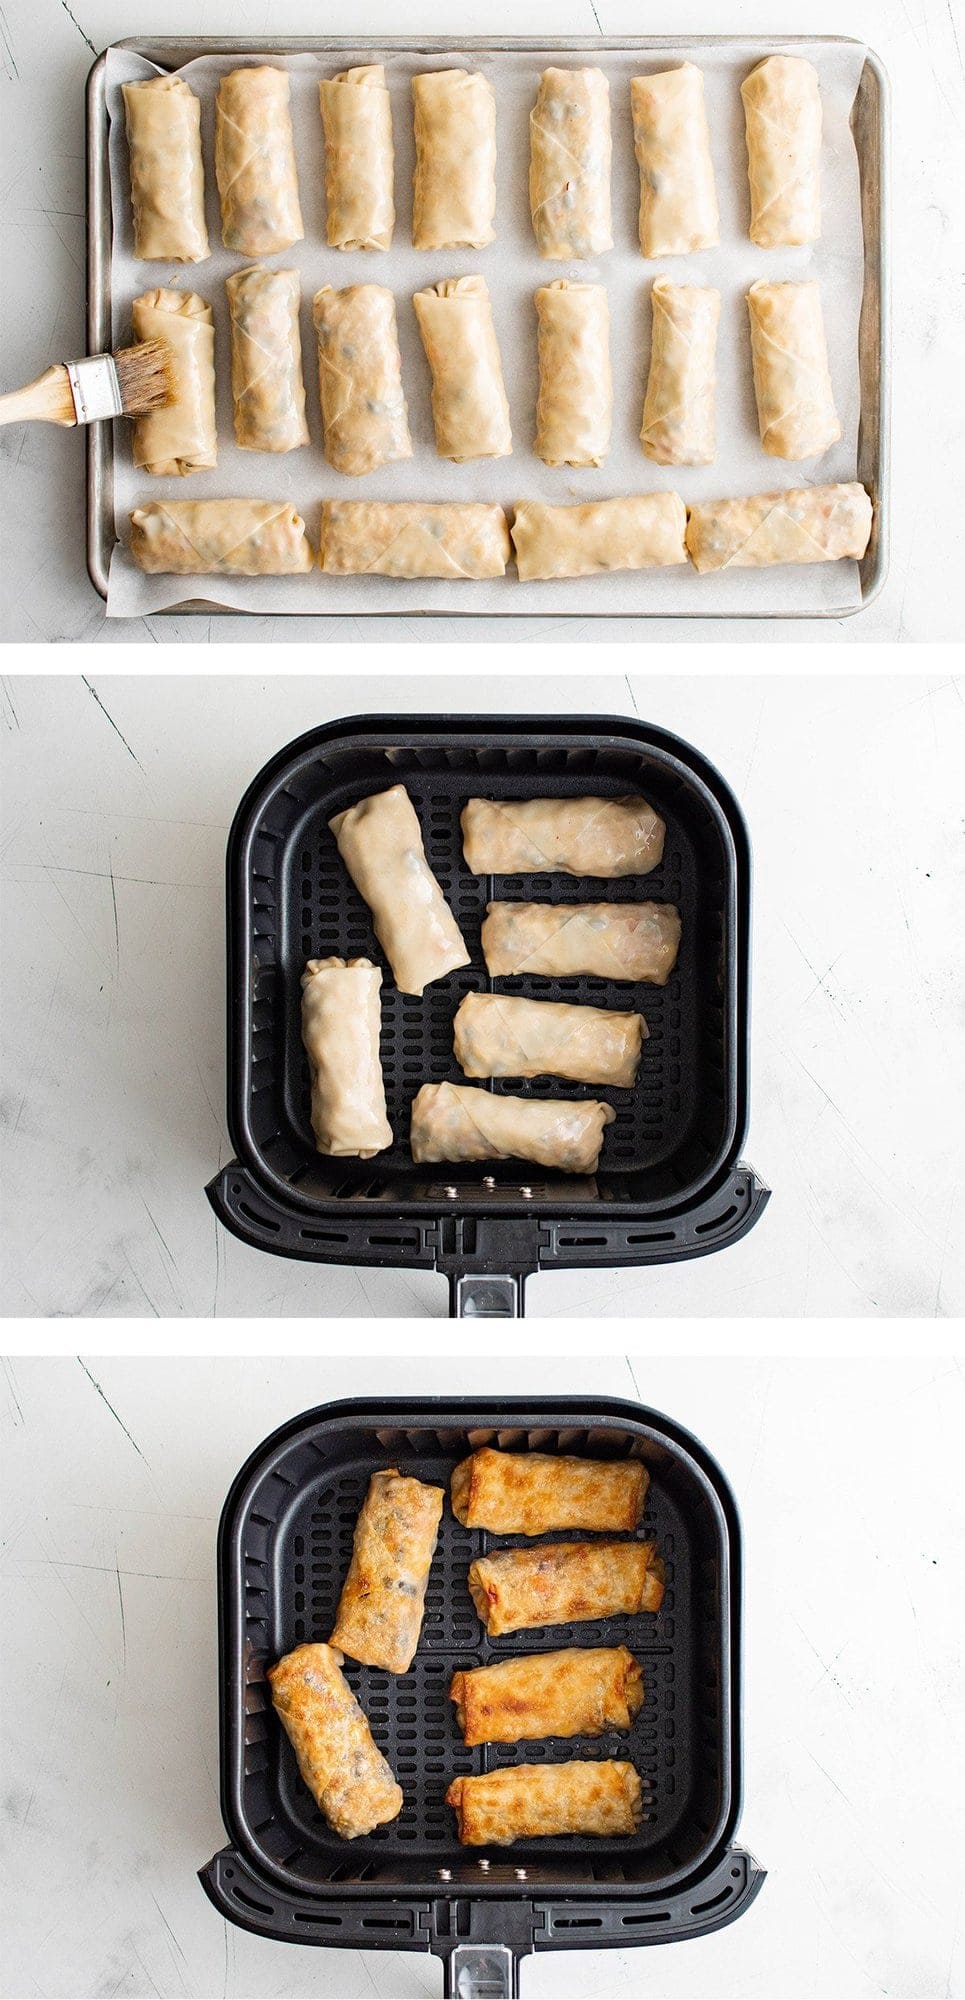 brushing egg rolls with egg wash, then placing in air fryer basket